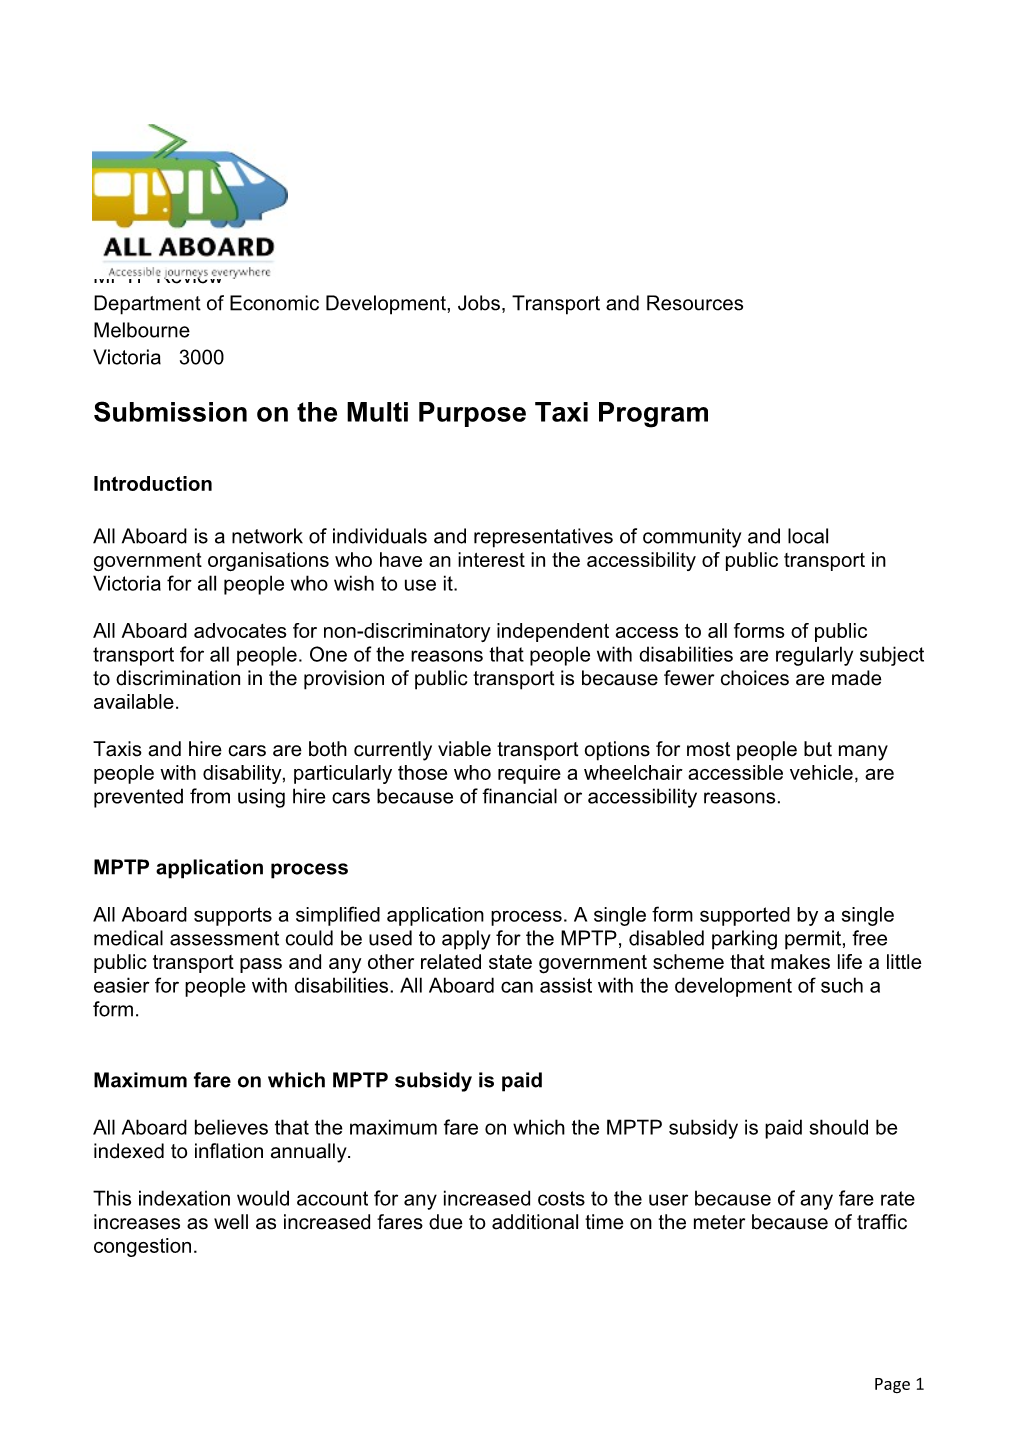 Submission on the Multi Purpose Taxi Program